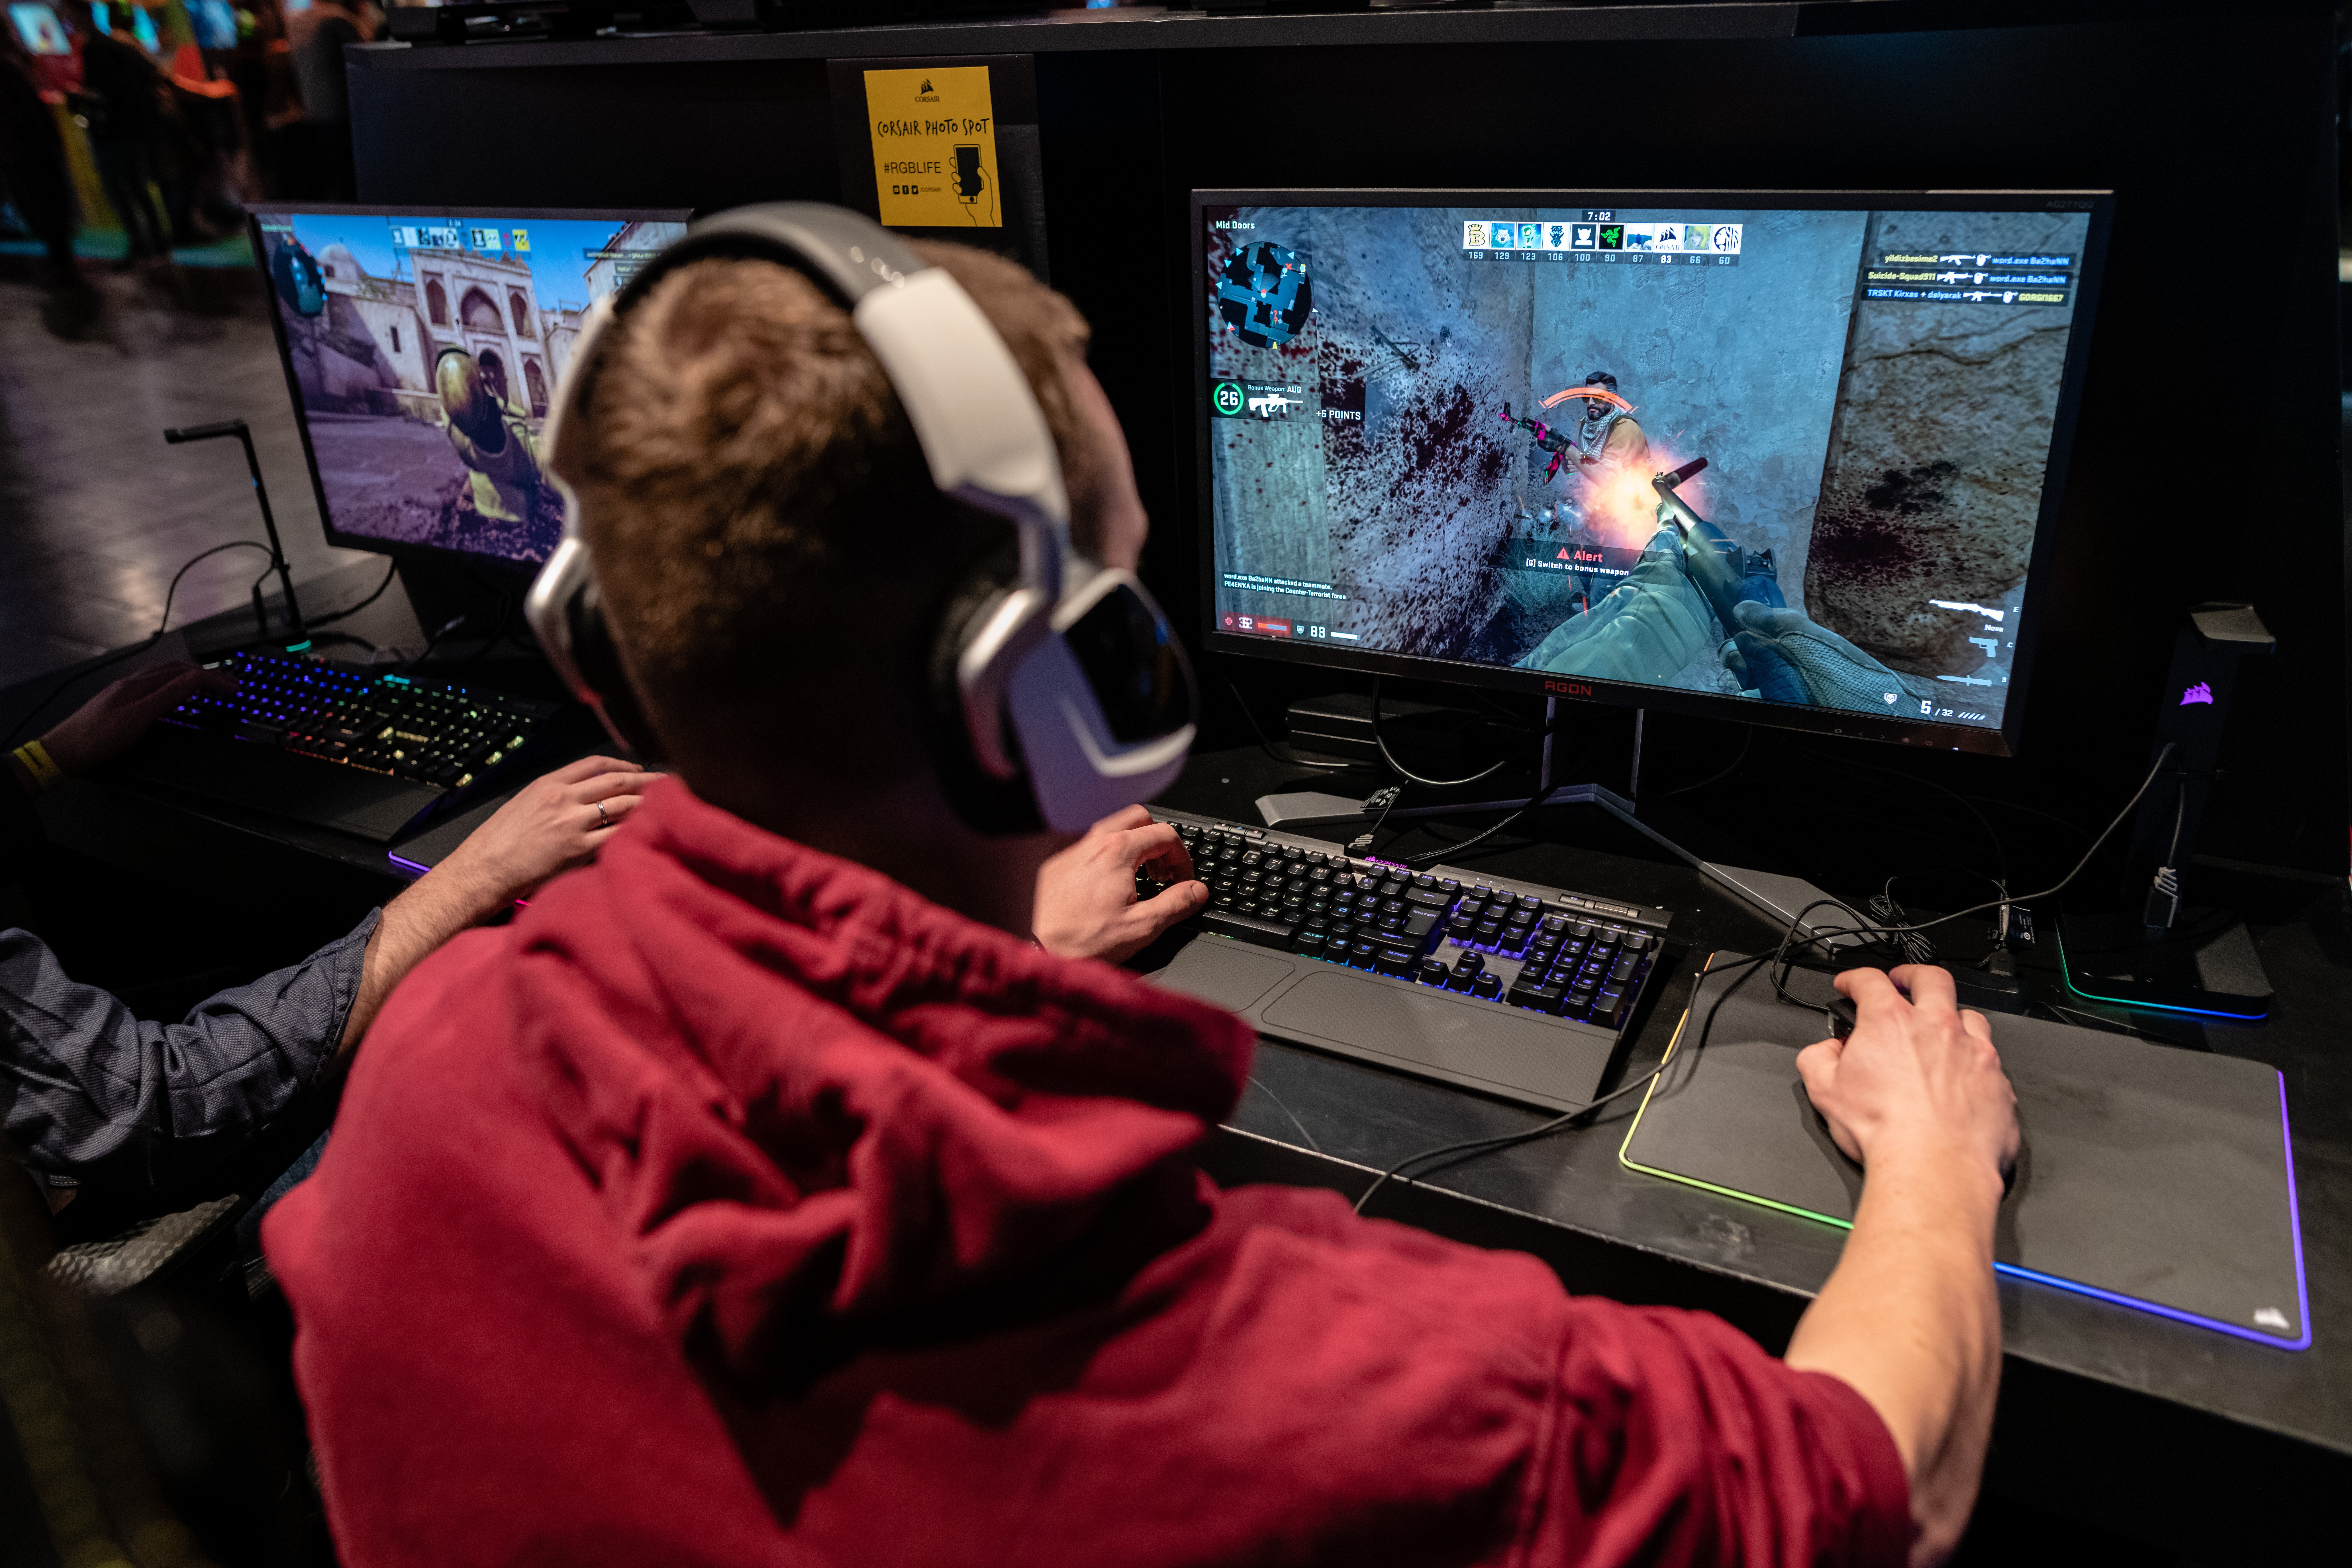 LEIPZIG, GERMANY - FEBRUARY 15: A participant sits at a computer monitor to play a video game at the 2019 DreamHack video gaming festival on February 15, 2019 in Leipzig, Germany.. (Jens Schlueter/Getty Images)